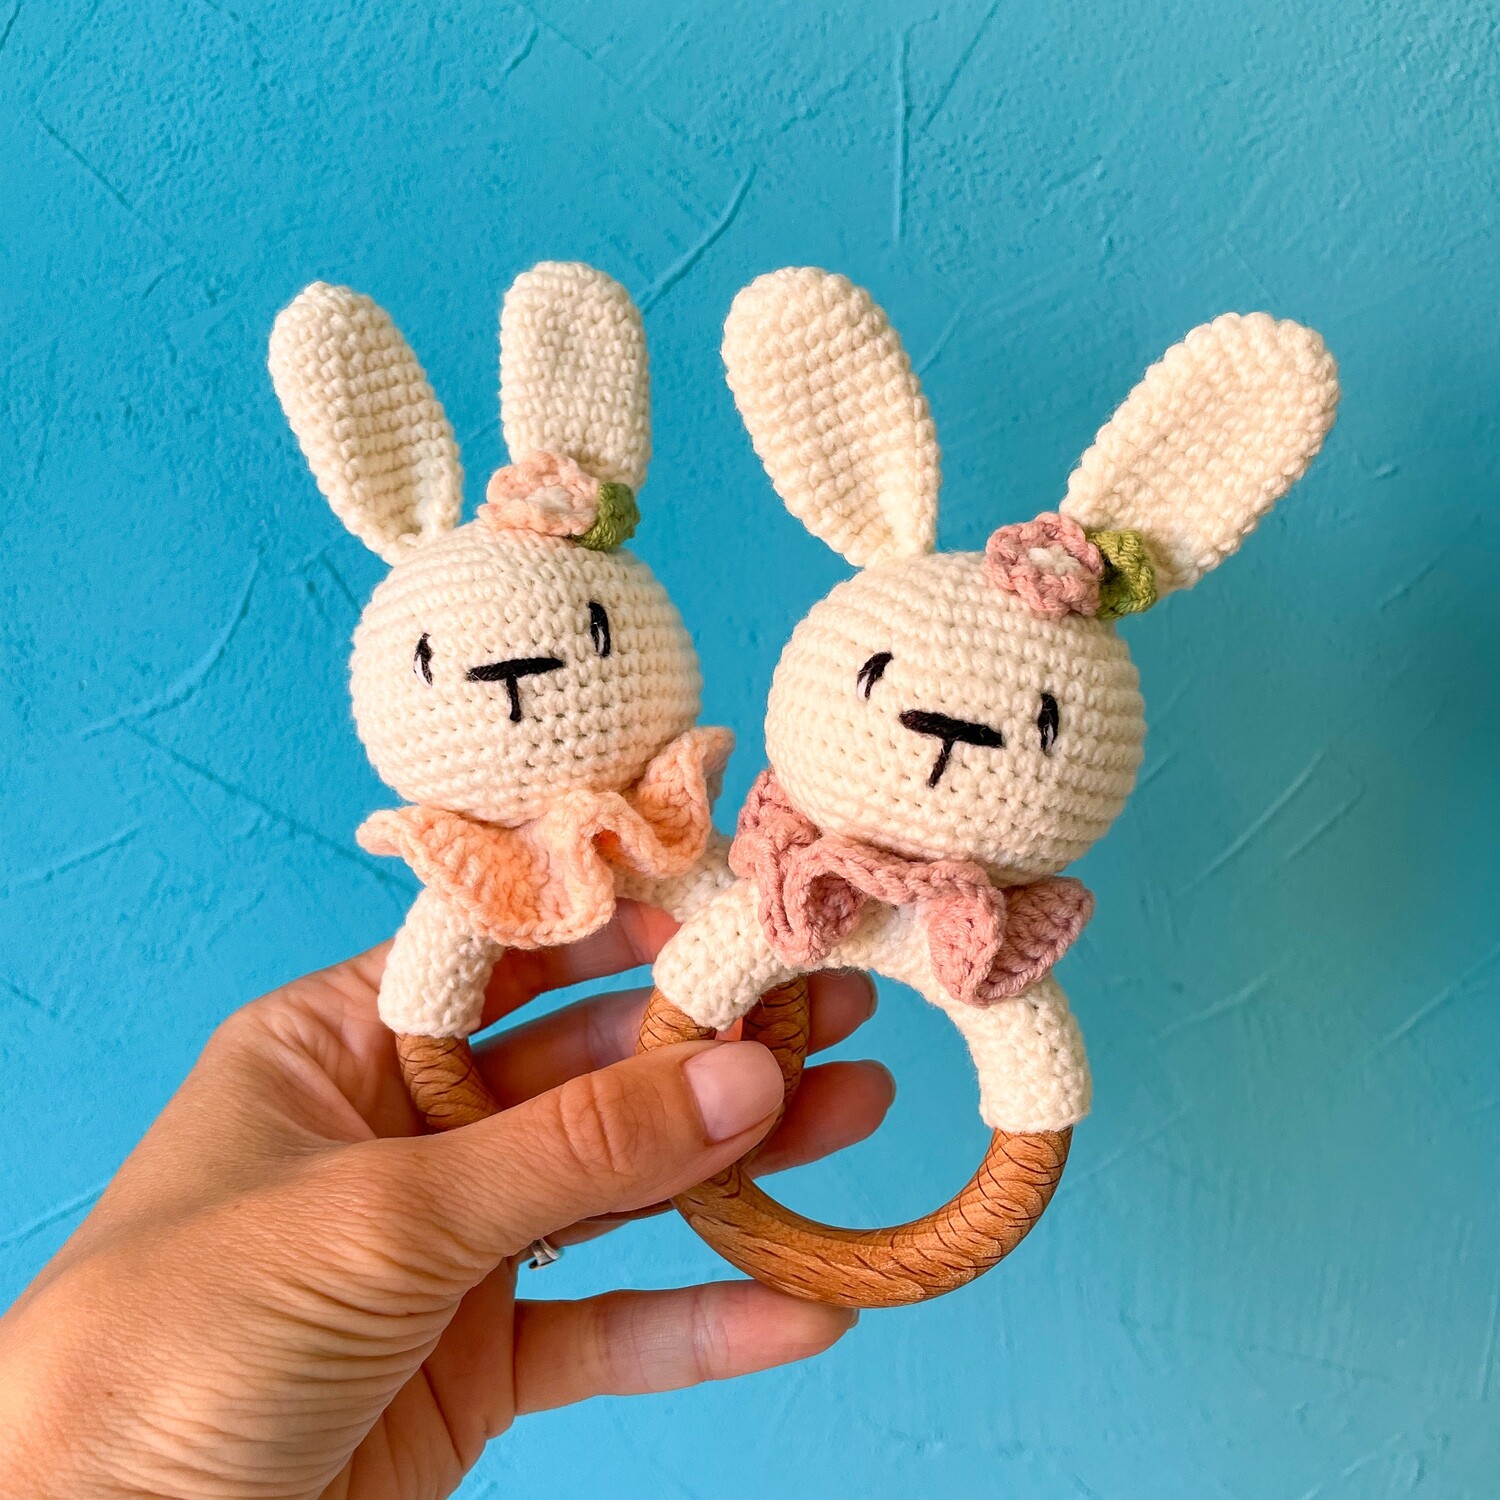 Crochet pattern baby bunny rattle, first baby toy with teether ring, amigurumi pattern toy, rabbit baby teether